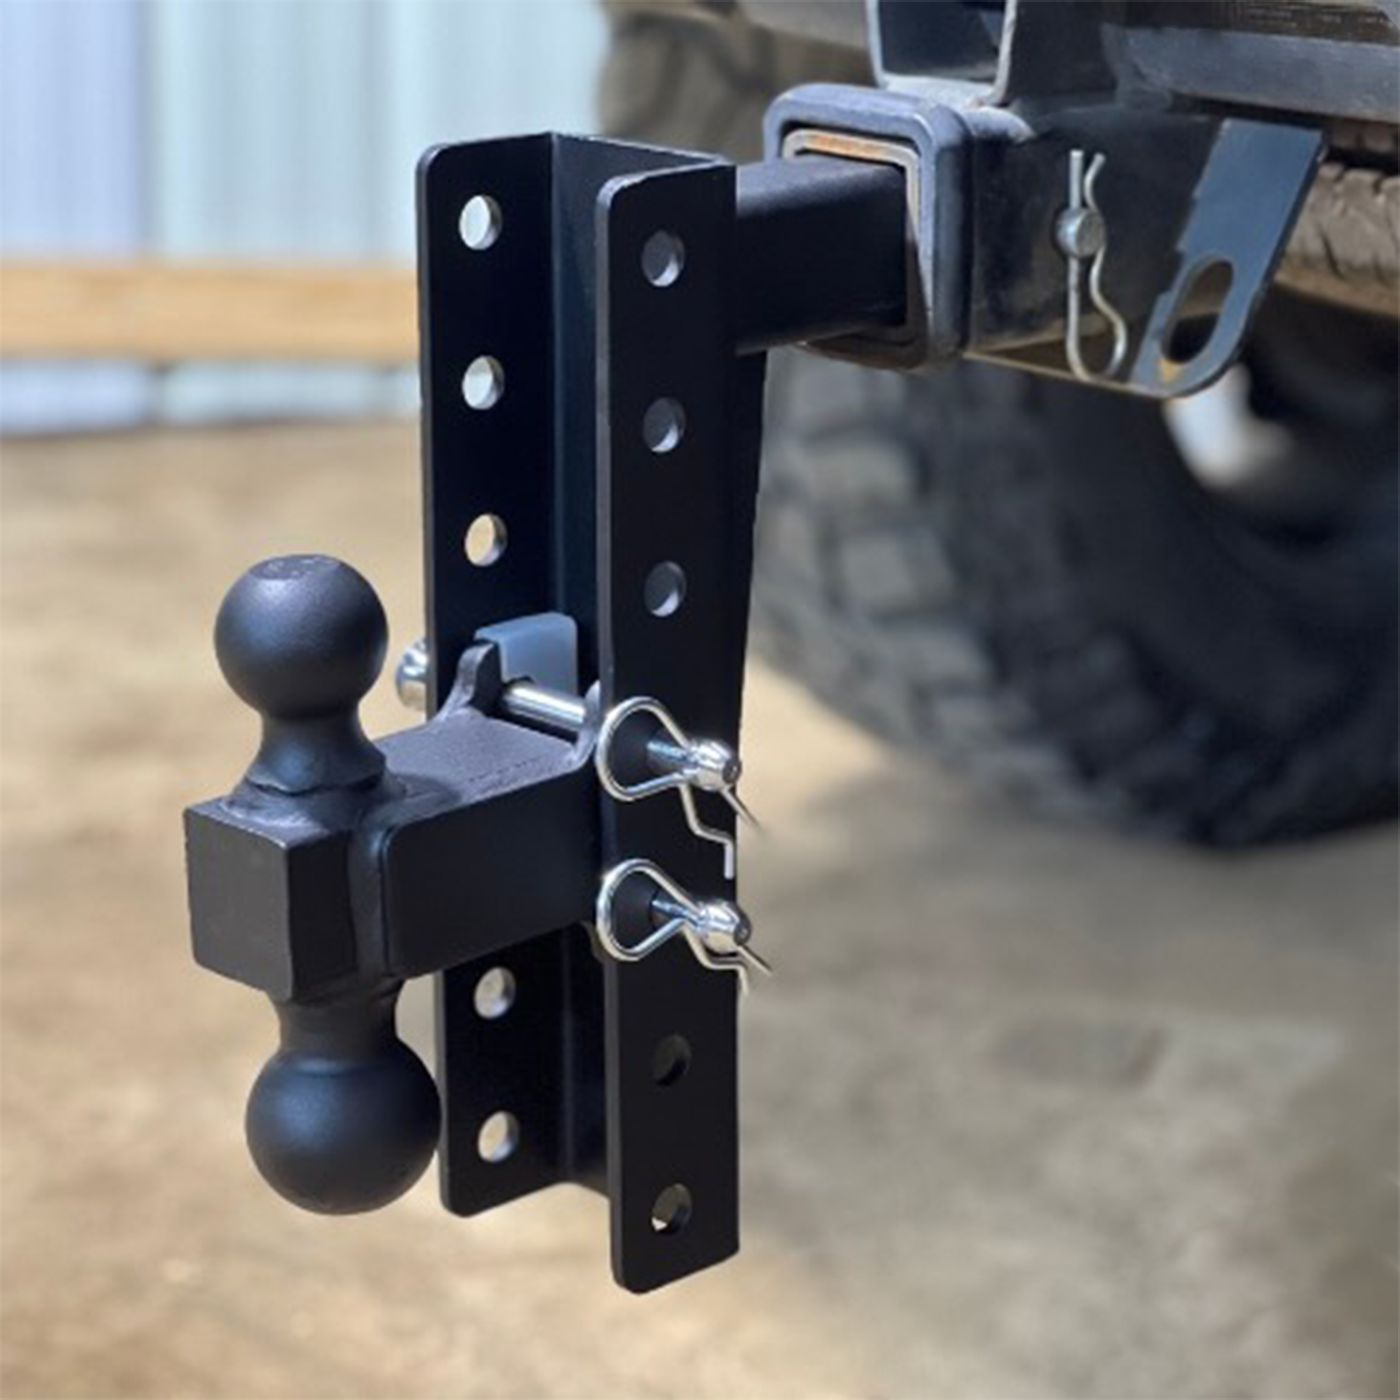 2.0" HEAVY DUTY 10" Adjustable  Trailer HITCH  openroad4wd.com   